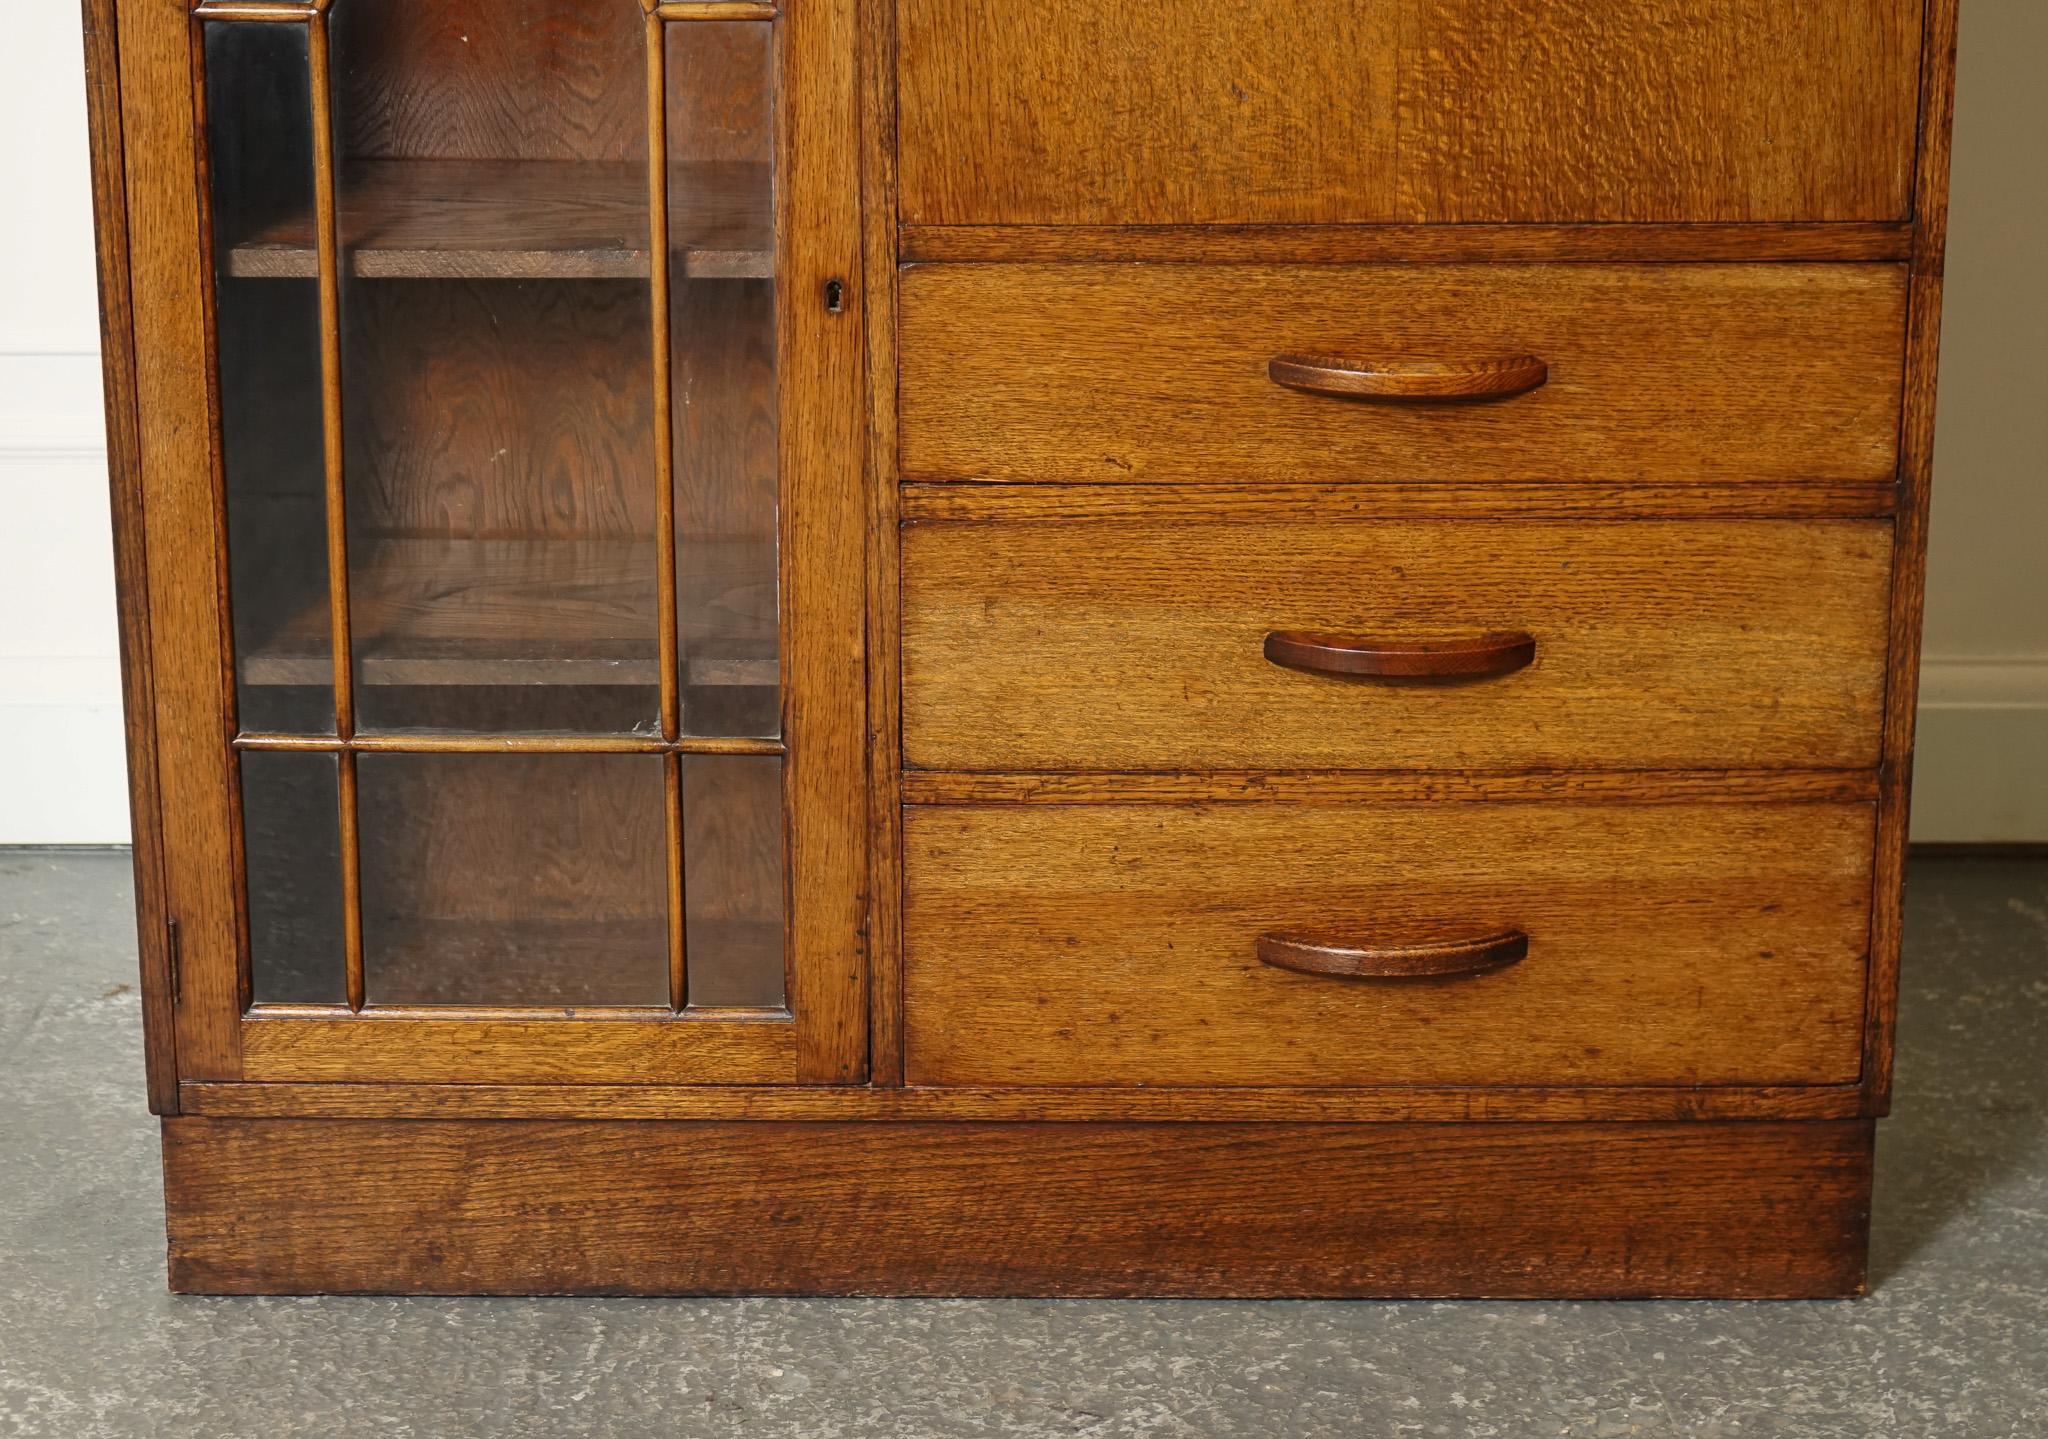 BEAUTIFUL ART DECO STYLE SMALL BOOKCASE CABiNET In Good Condition For Sale In Pulborough, GB